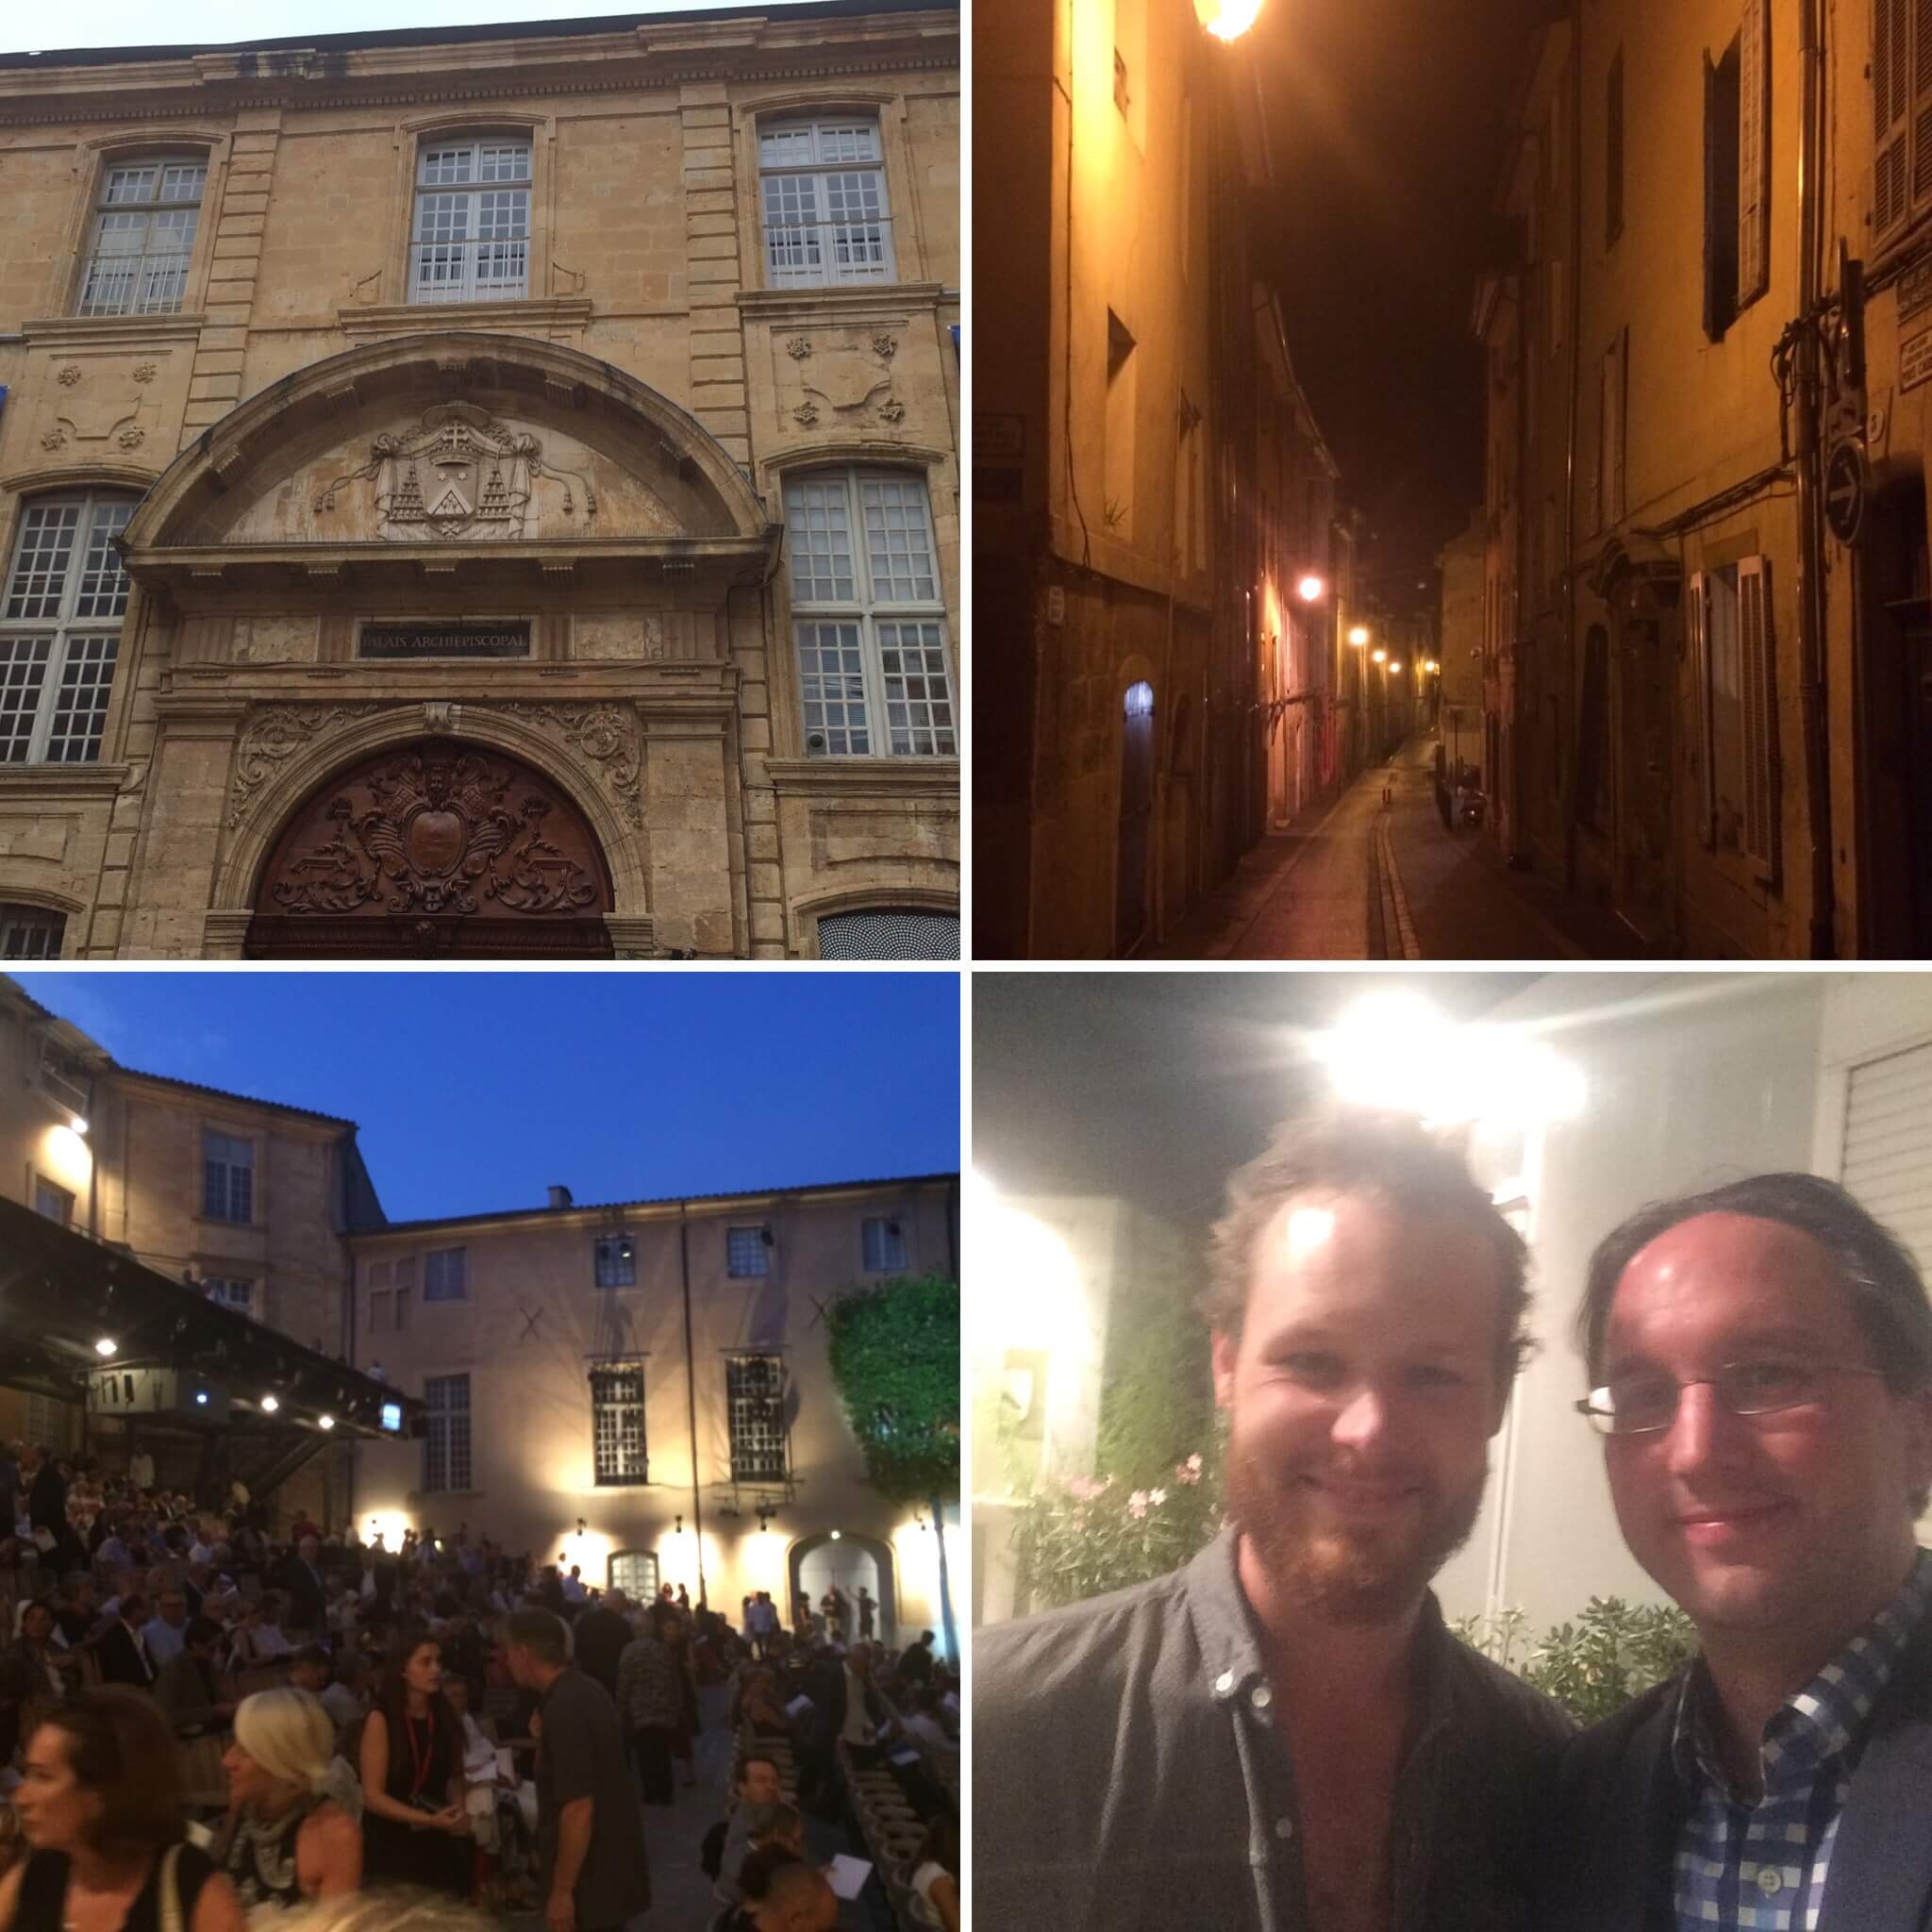 Scenes from Aix. Clockwise from top left: The Archbishop’s palace outside; the medieval streets at night; The Archbishop’s theater; with Philippe Sly.